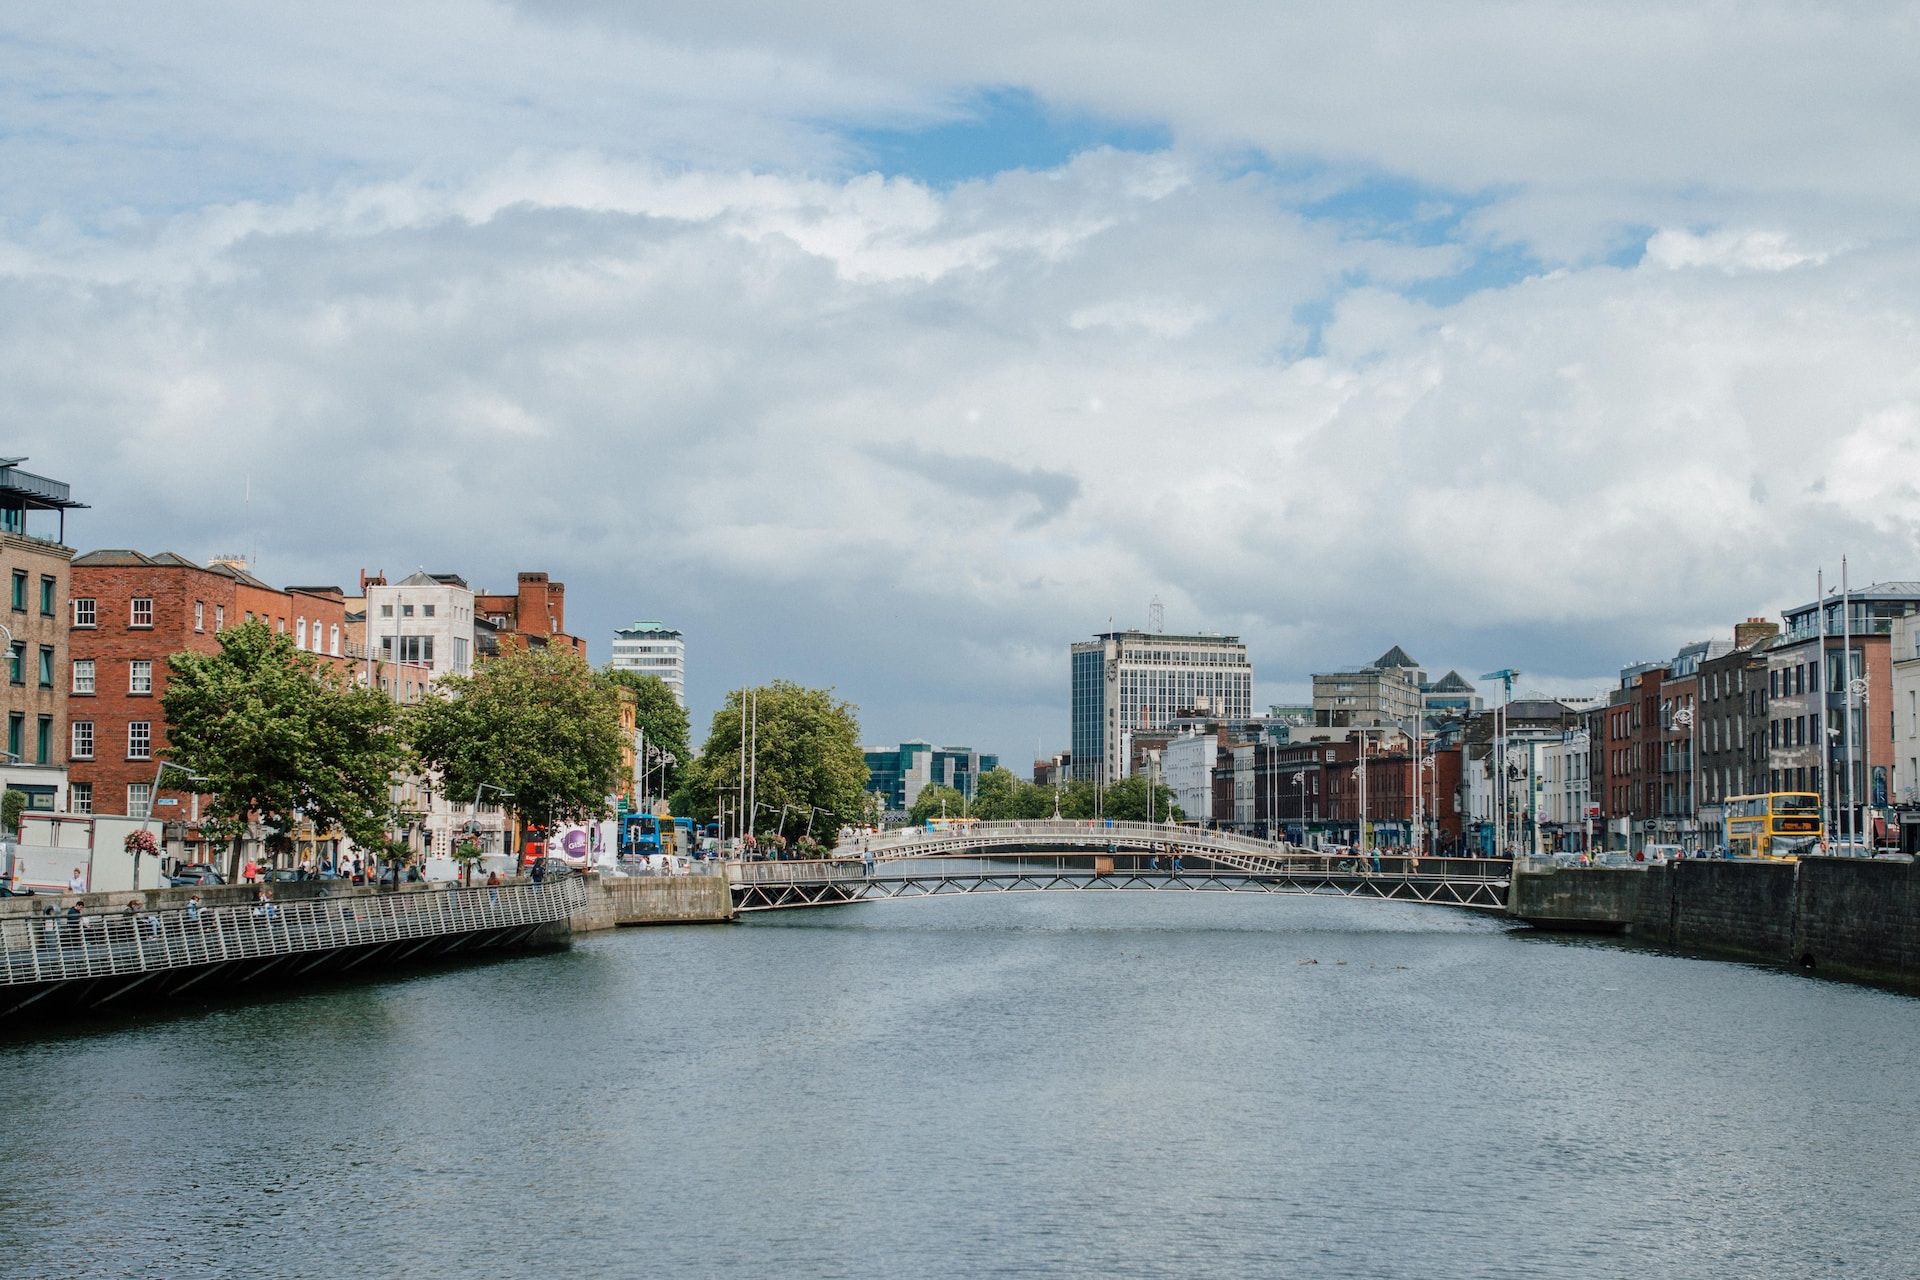 The Grand Canal Dock in Dublin